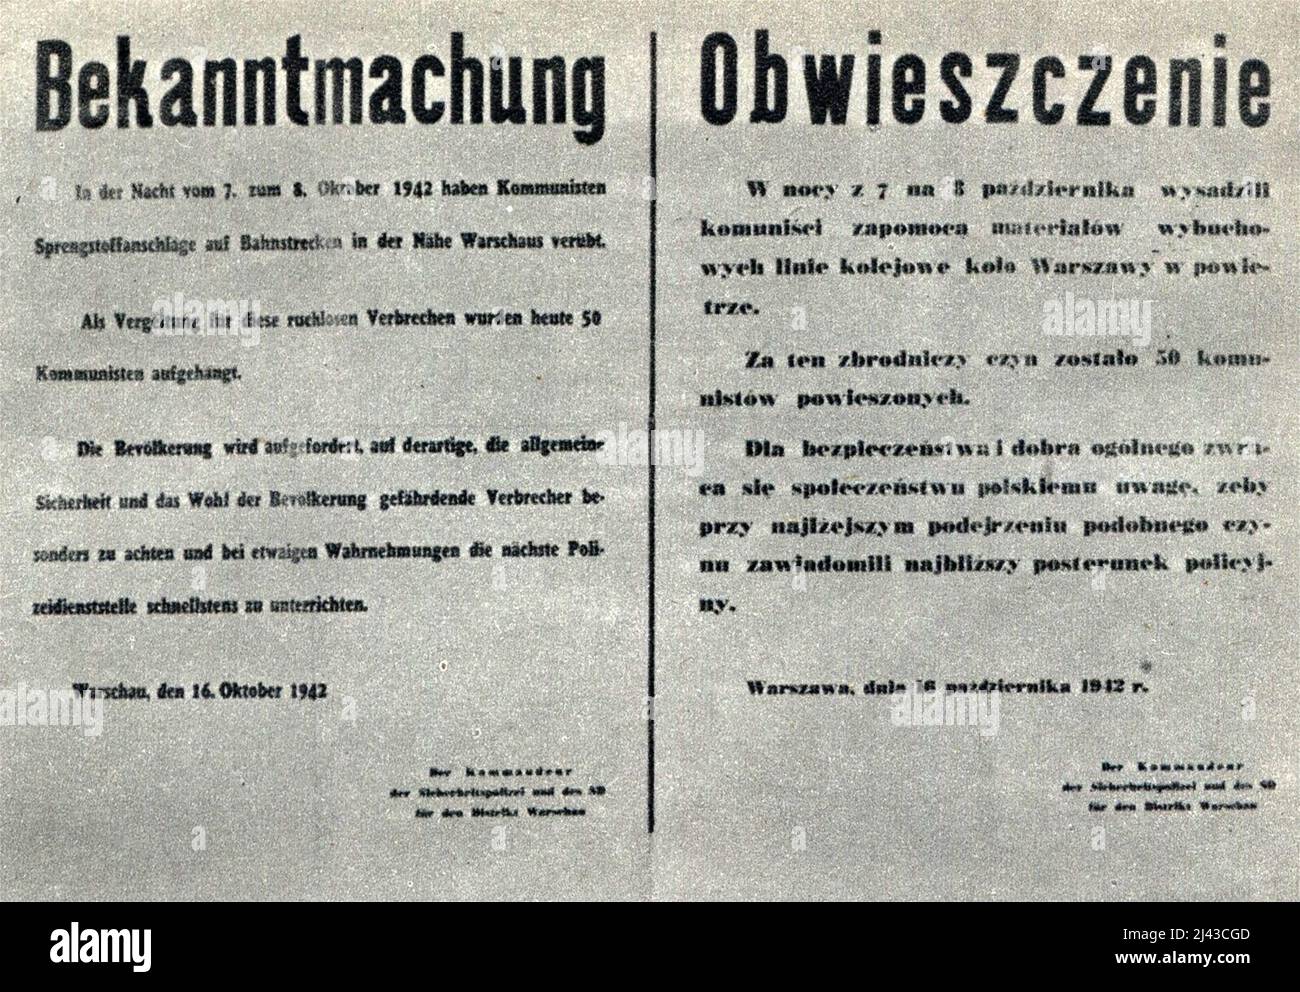 German announcement in occupied Poland (dated 16th October 1942), signed by Commandant of SD and Sicherheitspolizei in Warsaw – SS-Obersturmbannführer Ludwig Hahn, informing about the hanging of 50 'communists' as a reprisal for blowing up railway lines near Warsaw by the Polish resistance movement, October 1942 Stock Photo